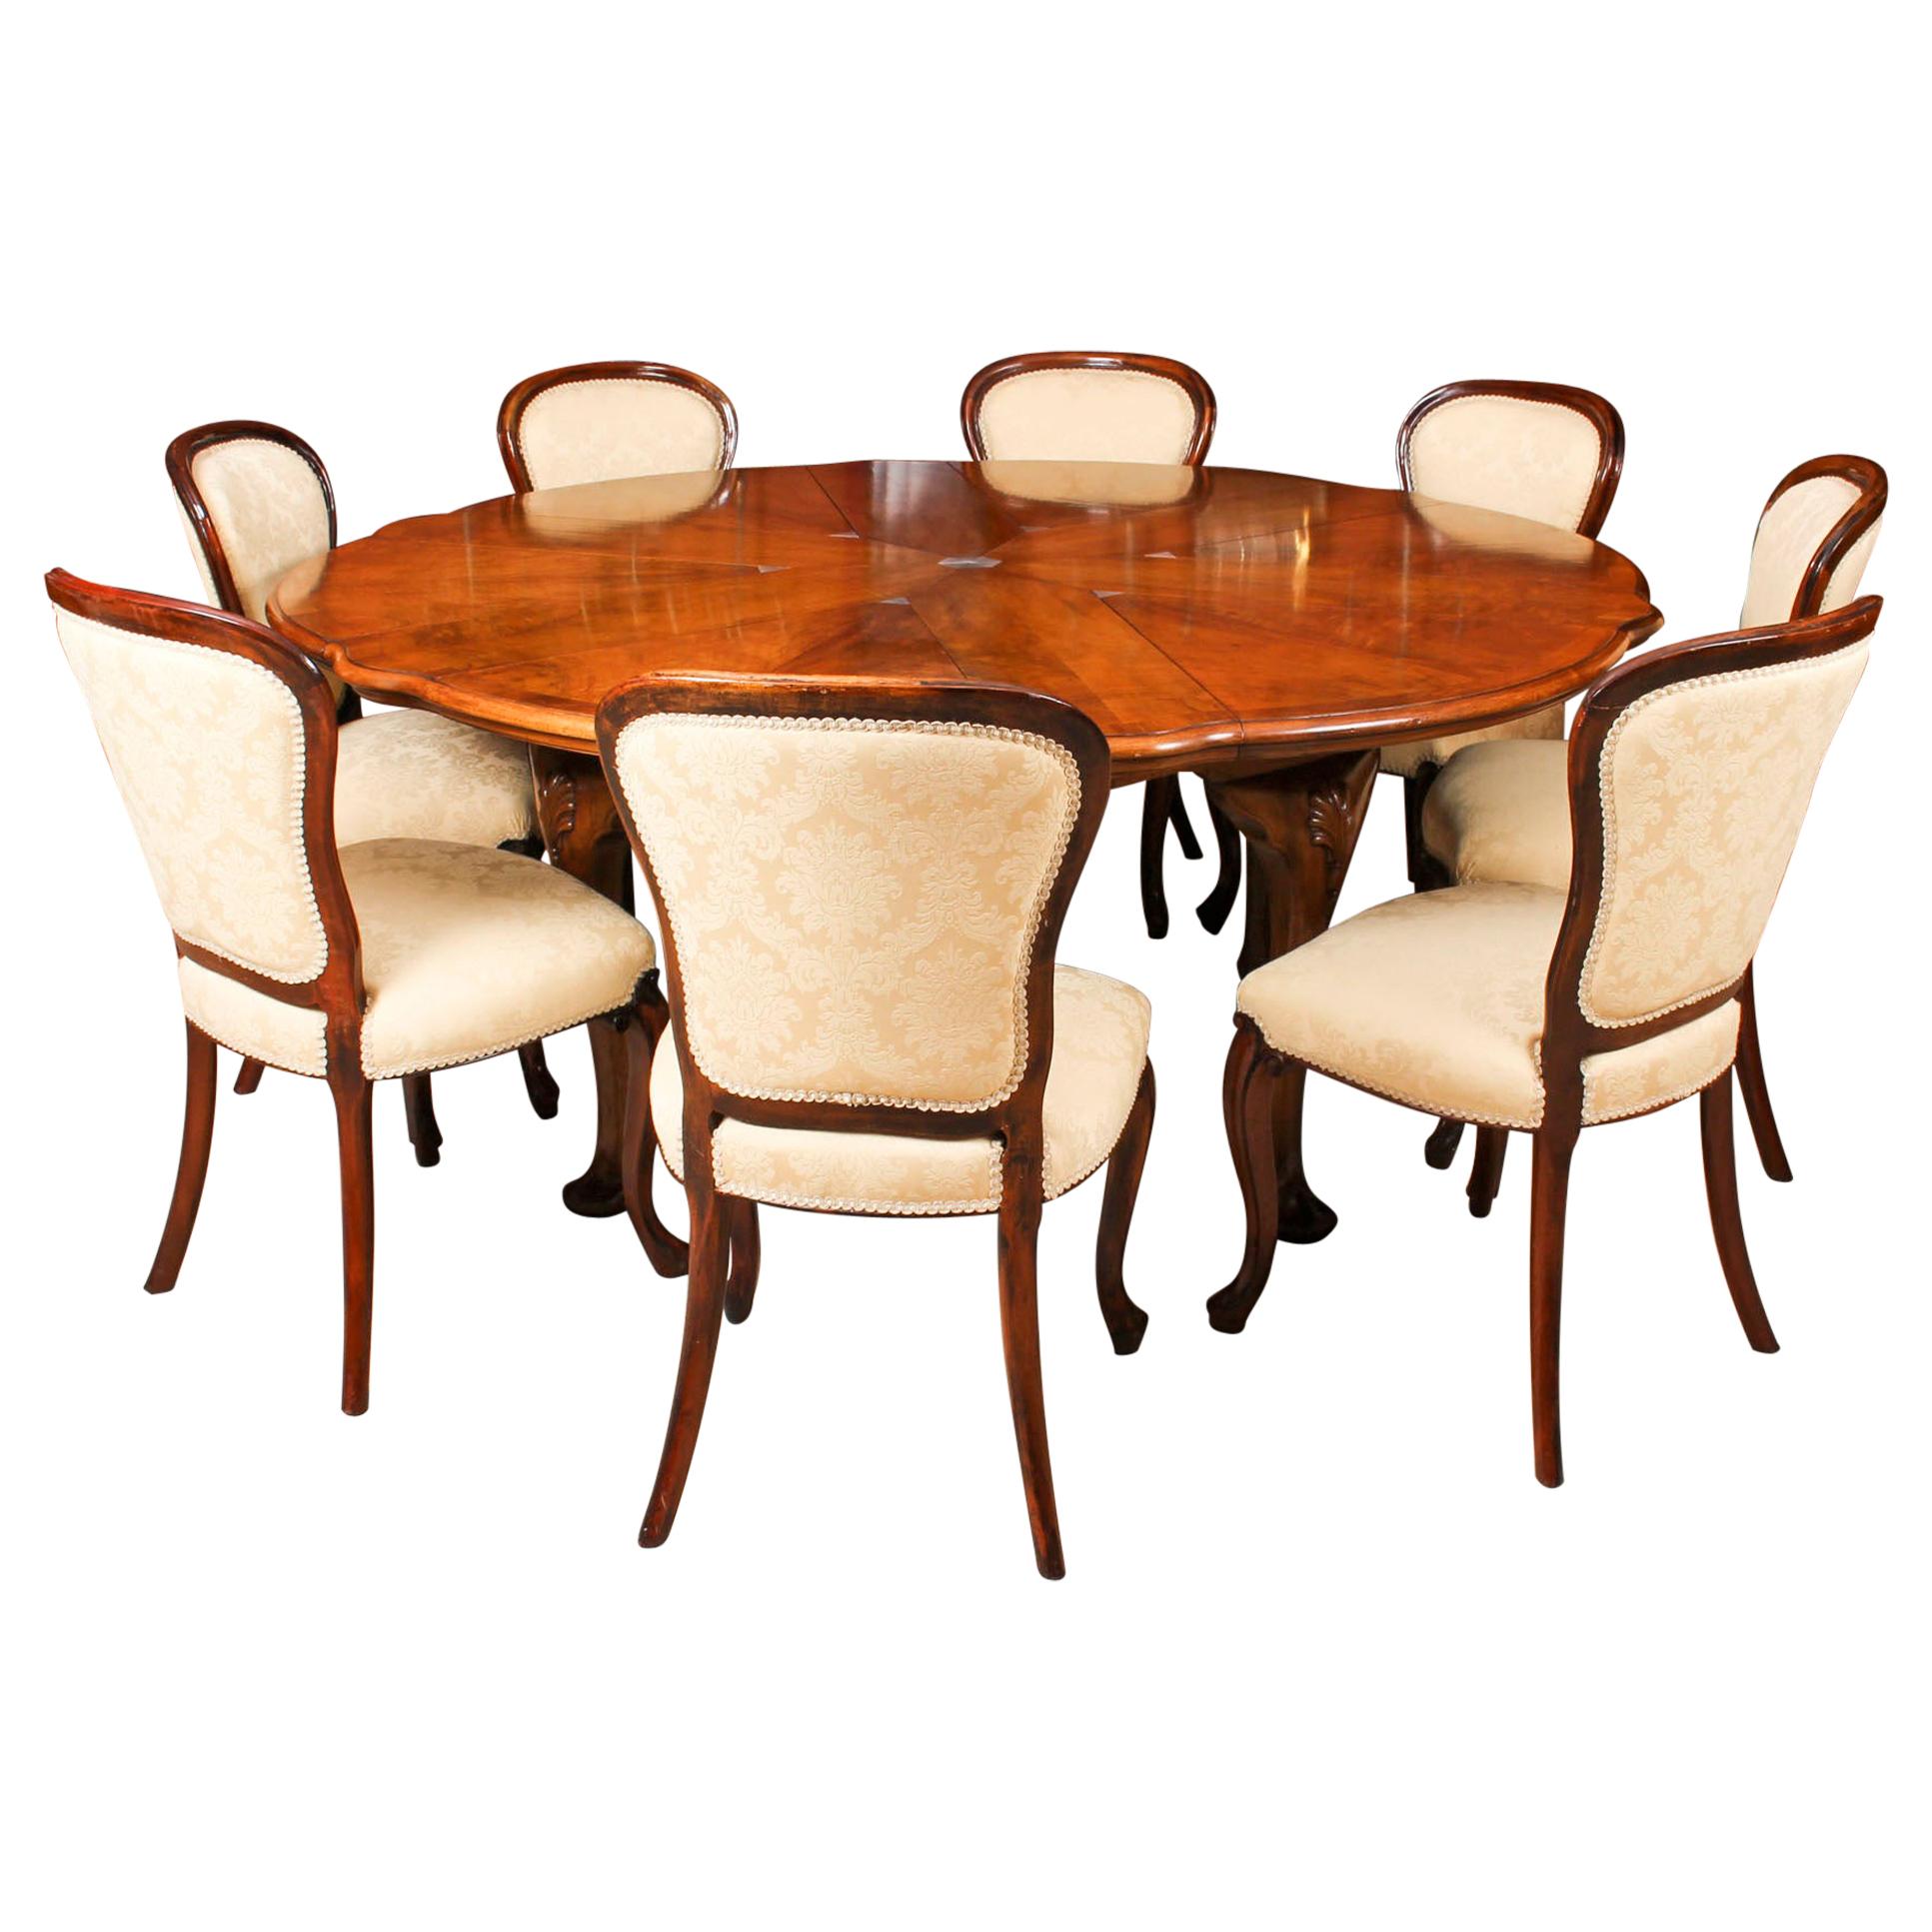 Antique Walnut Jupe Action Dining Table by Gillows & 8 Chairs Late 19th Century